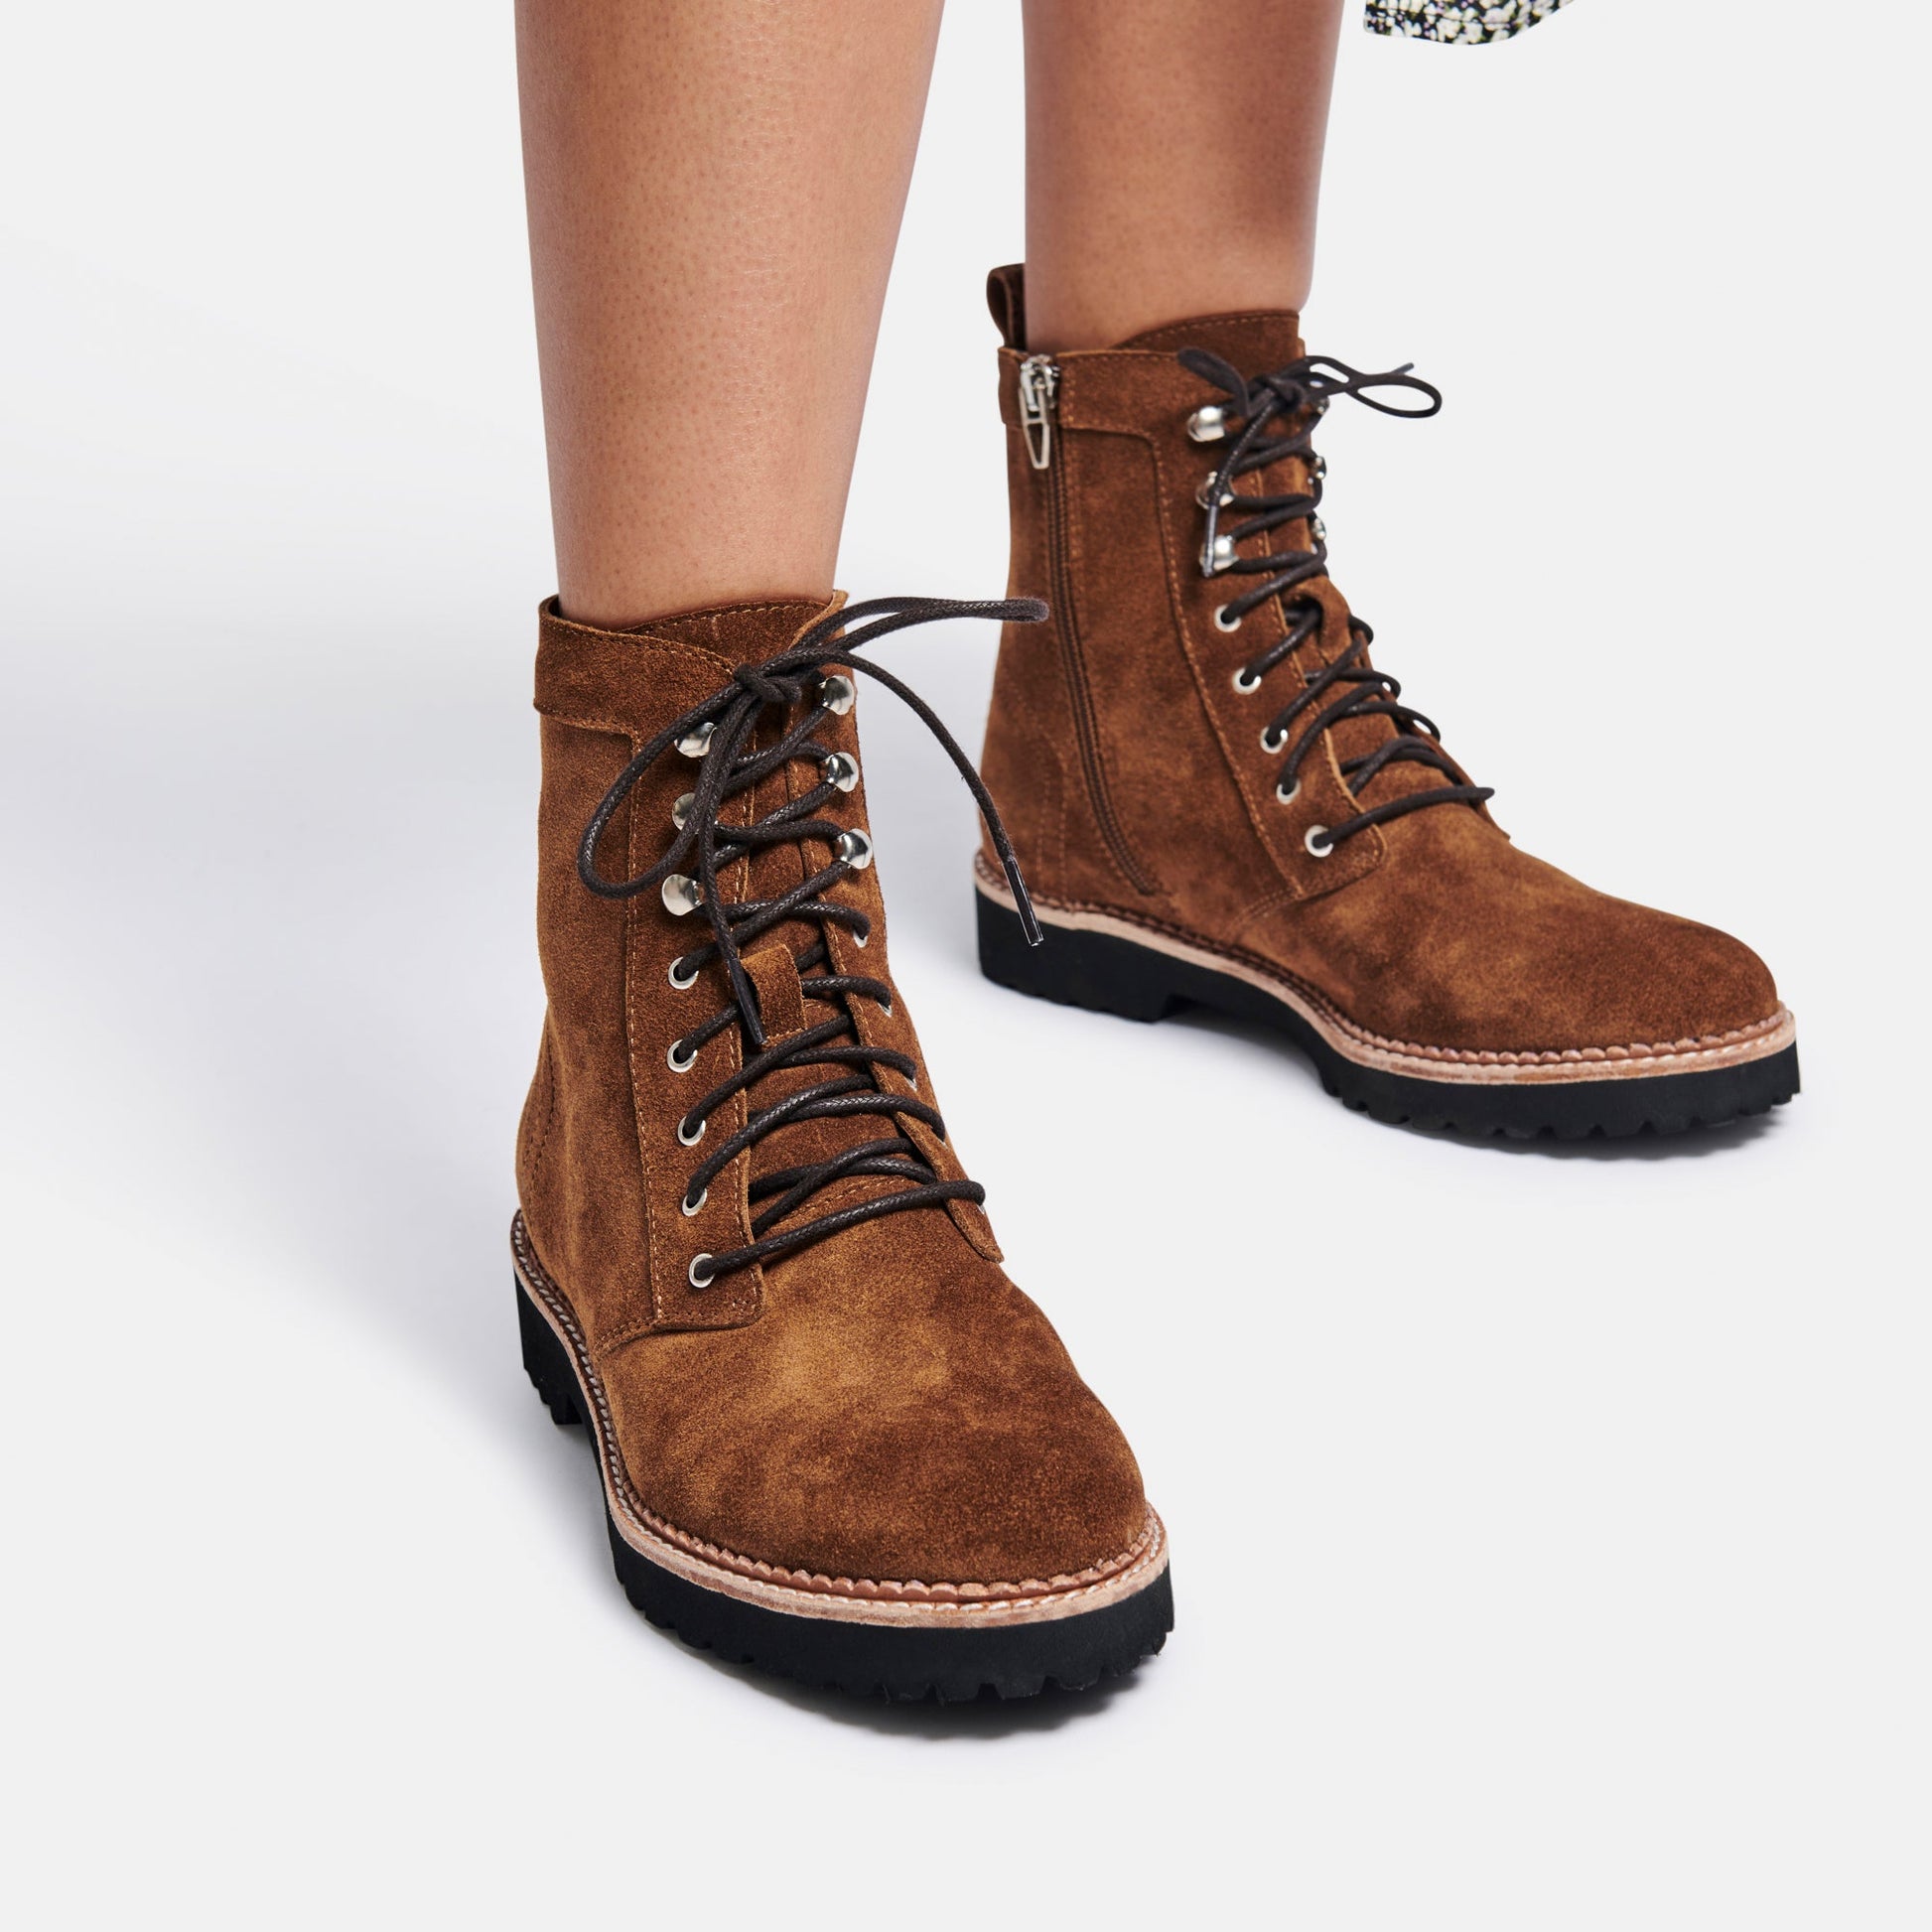 AVENA BOOTS IN DK BROWN SUEDE -   Dolce Vita